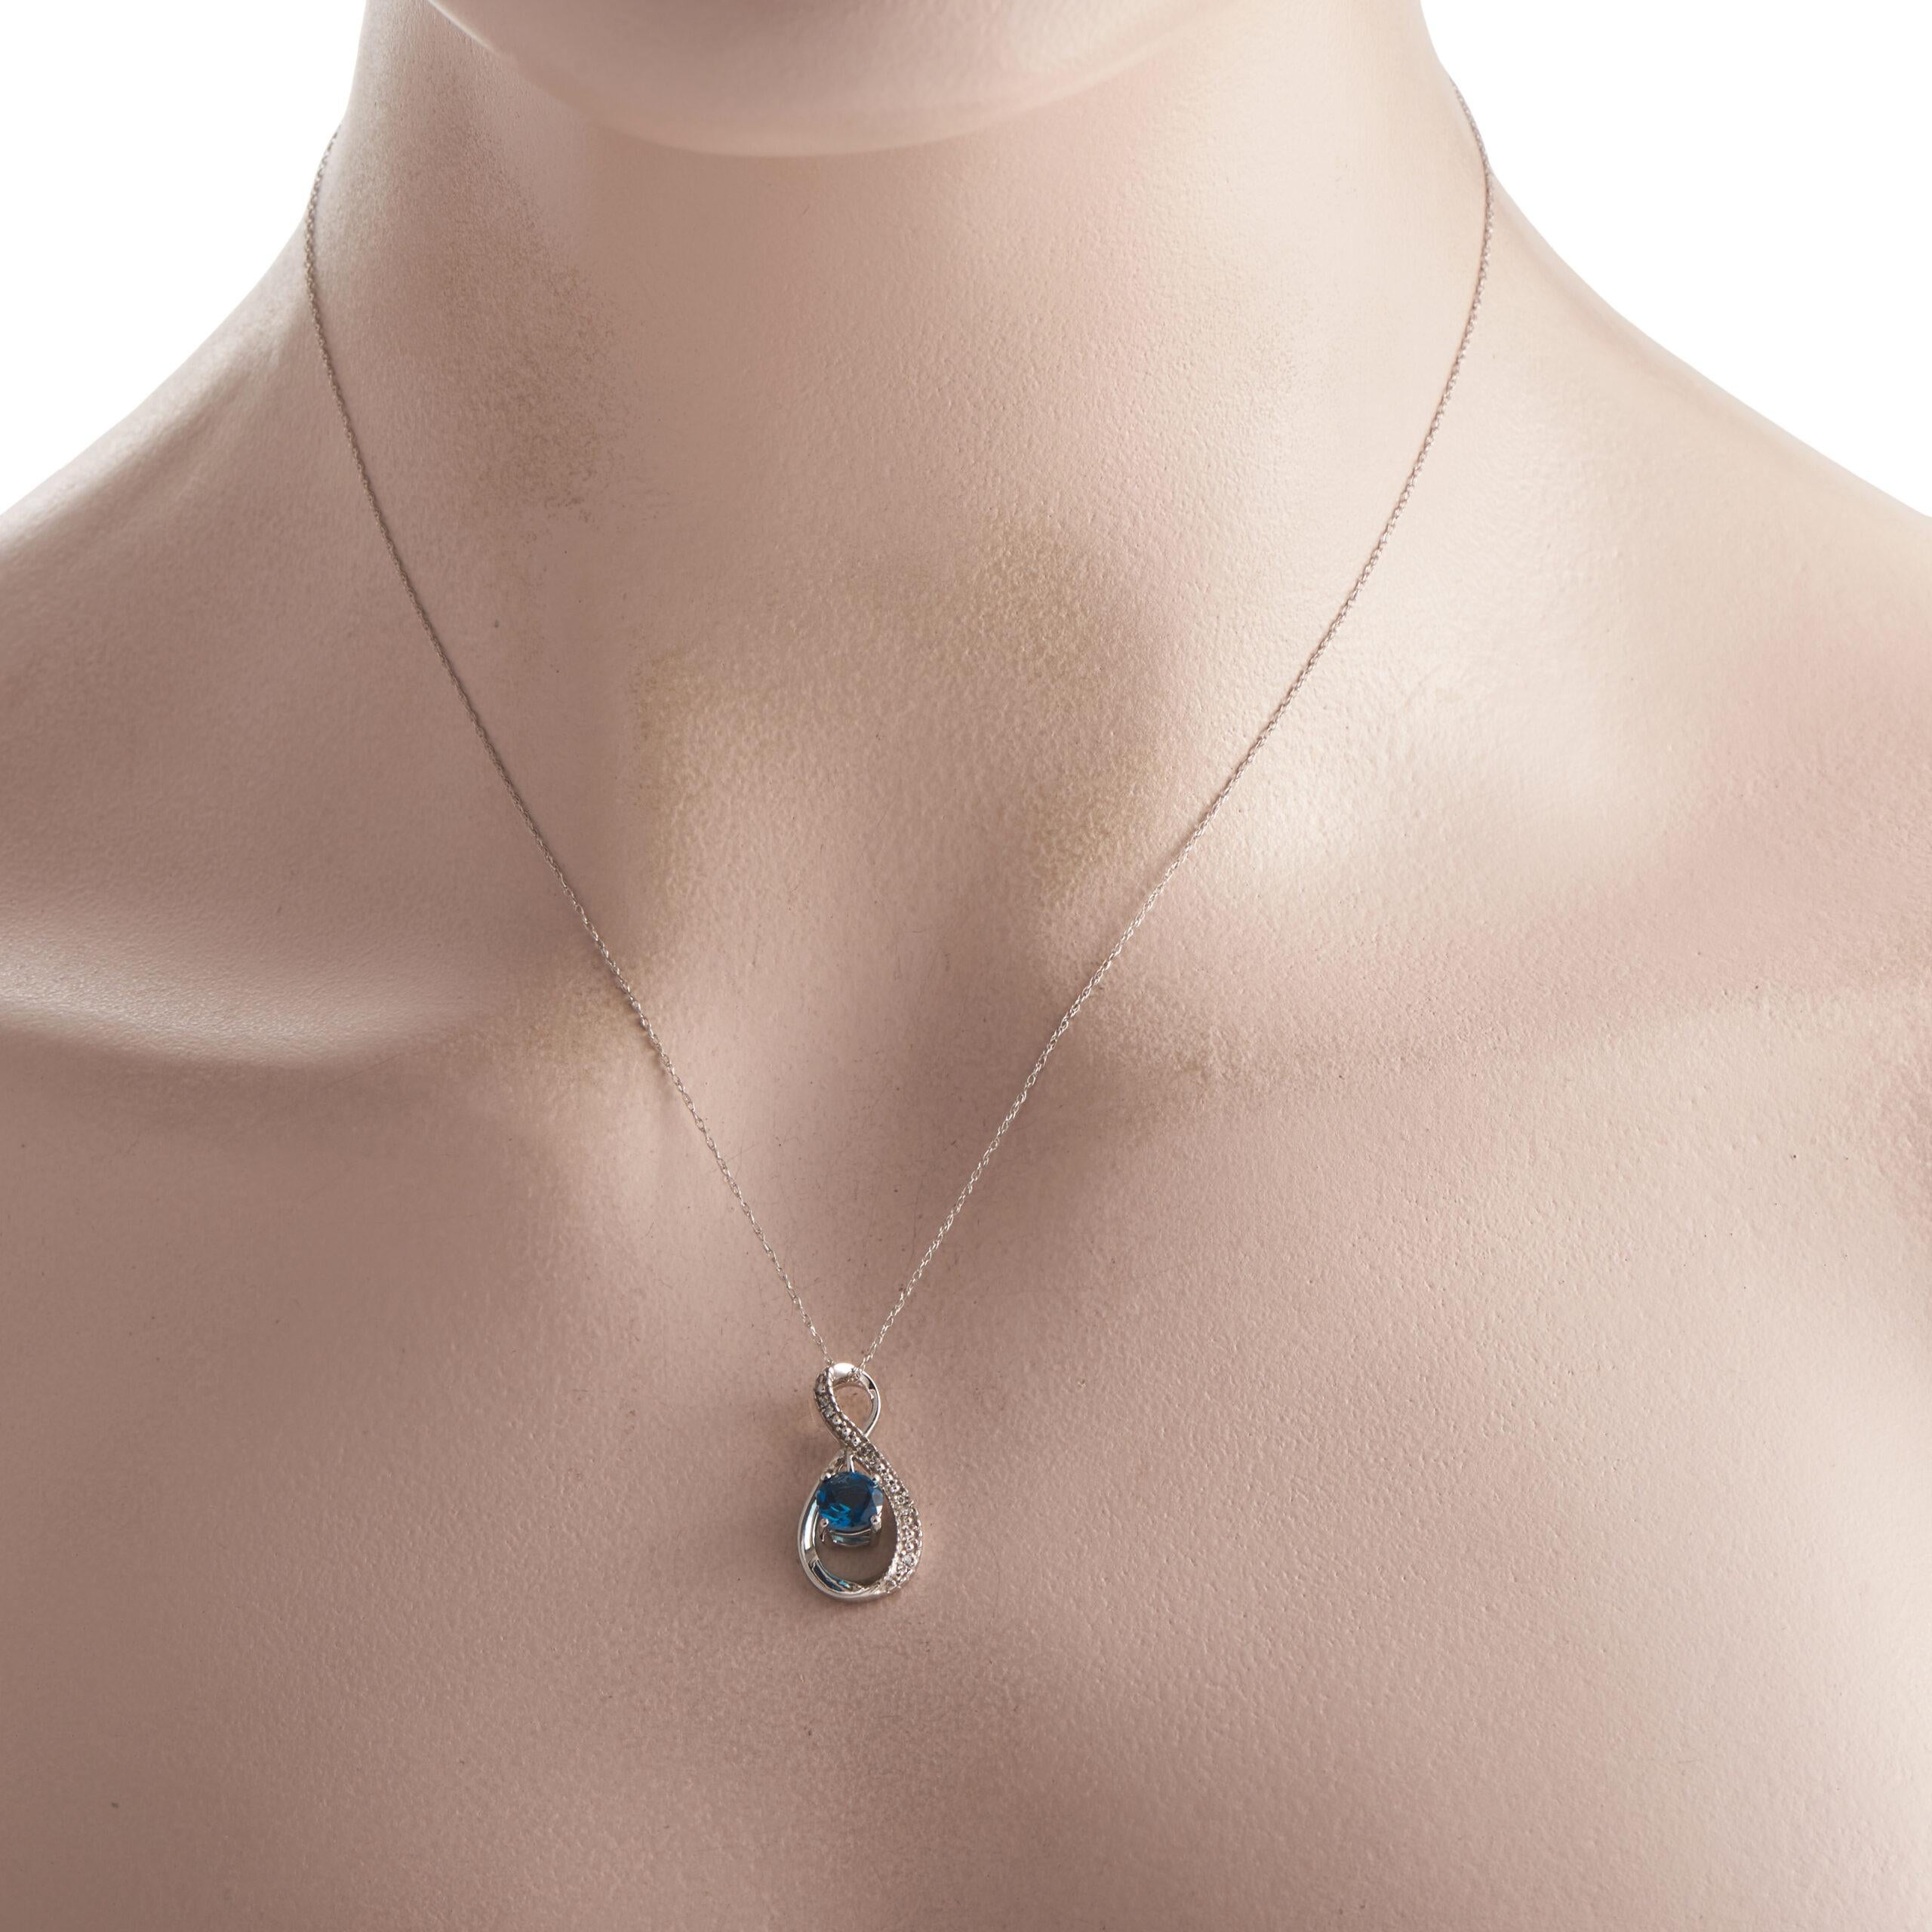 An alluring jewelry gift for a December-born or a December anniversary. This LB Exclusive necklace in 14K white gold features a stylized infinity pendant decorated with a wavy row of round diamonds and a beautiful blue topaz gemstone. The double